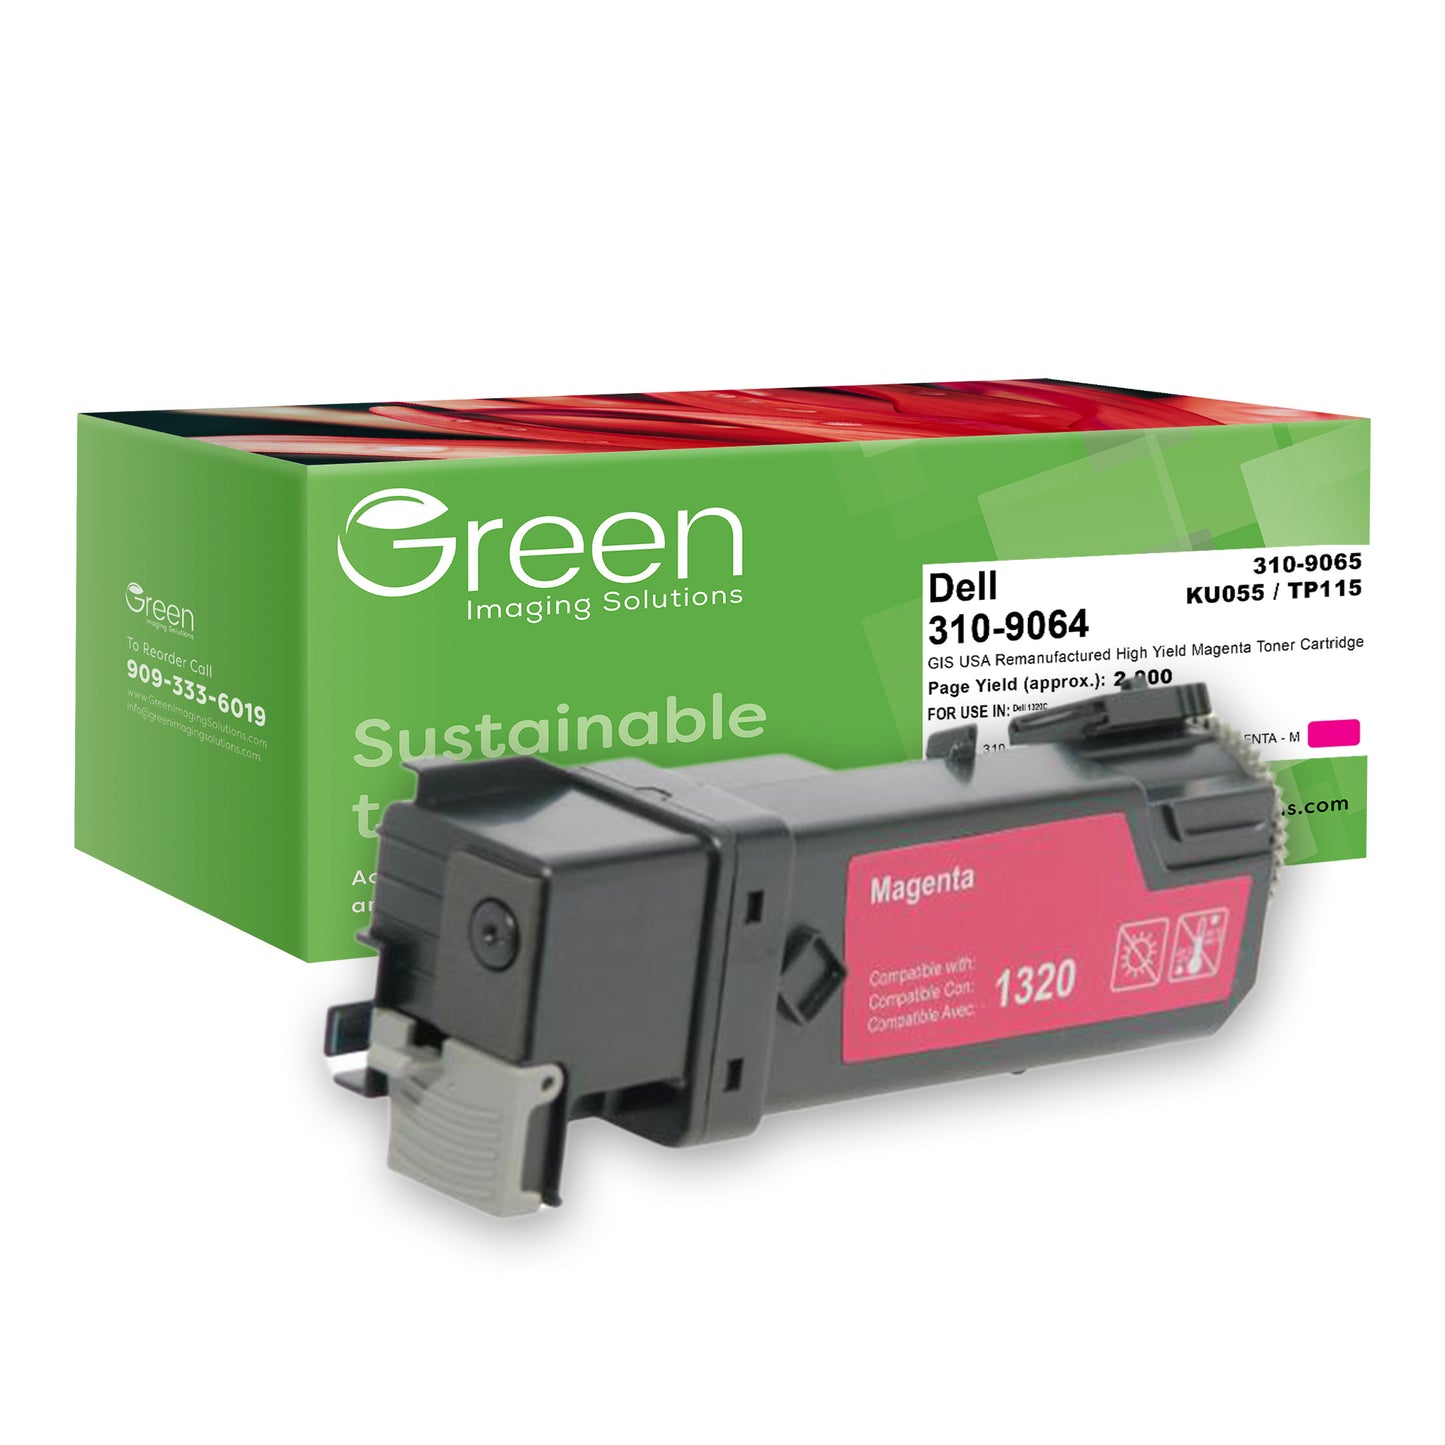 Green Imaging Solutions USA Remanufactured Non-OEM New High Yield Magenta Toner Cartridge for Dell 1320